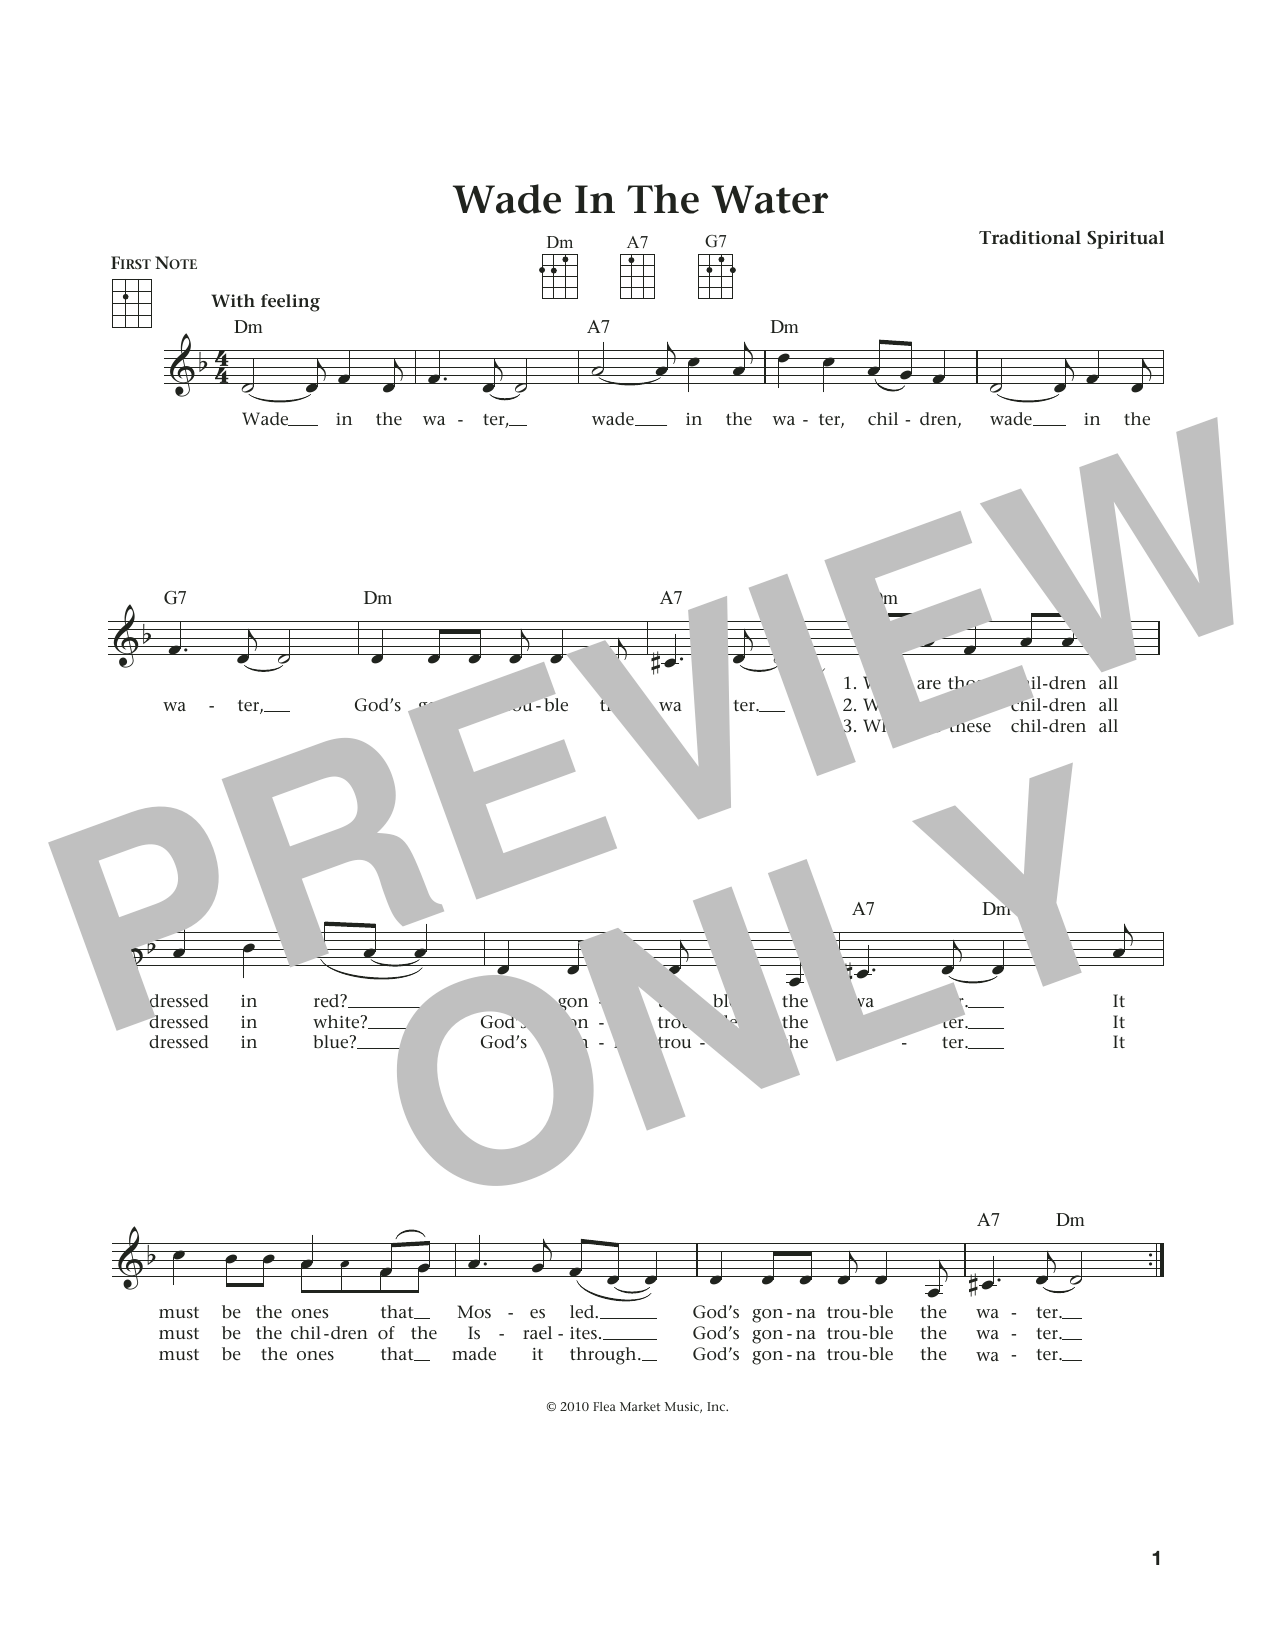 Download Traditional Spiritual Wade In The Water (from The Daily Ukule Sheet Music